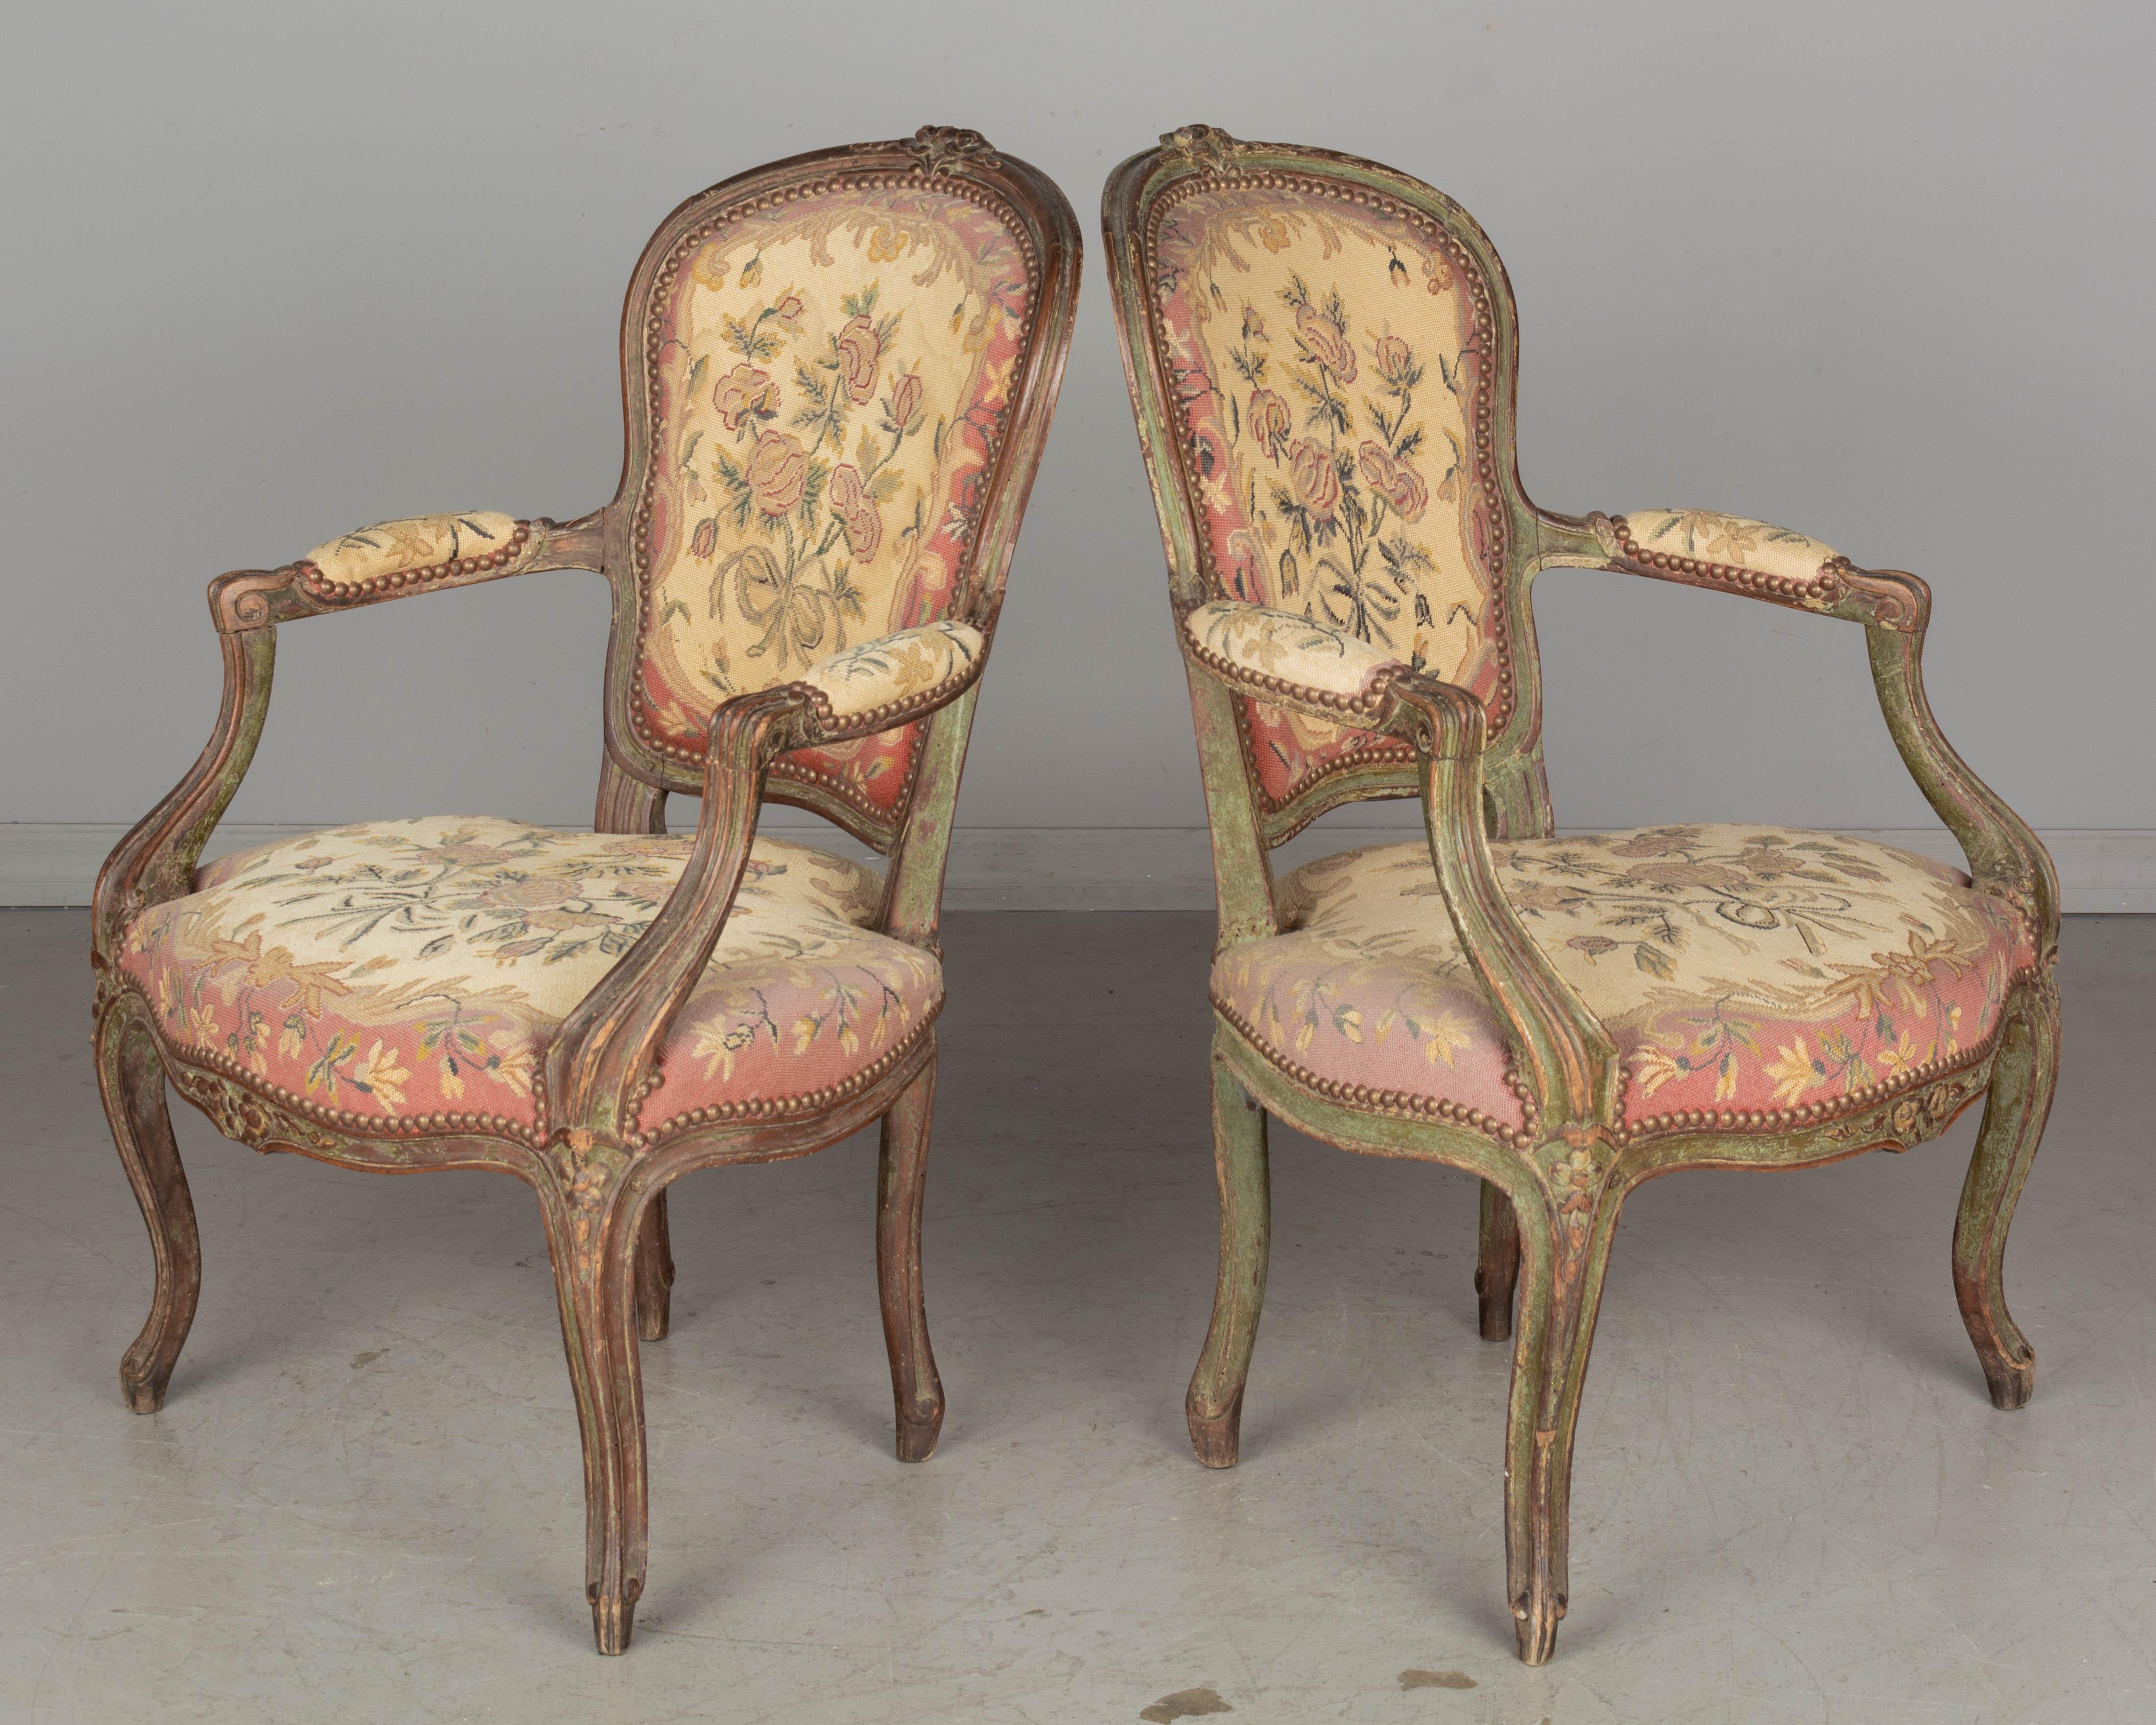 Hand-Crafted 18th Century Louis XV French Fauteuil Armchairs, a Pair